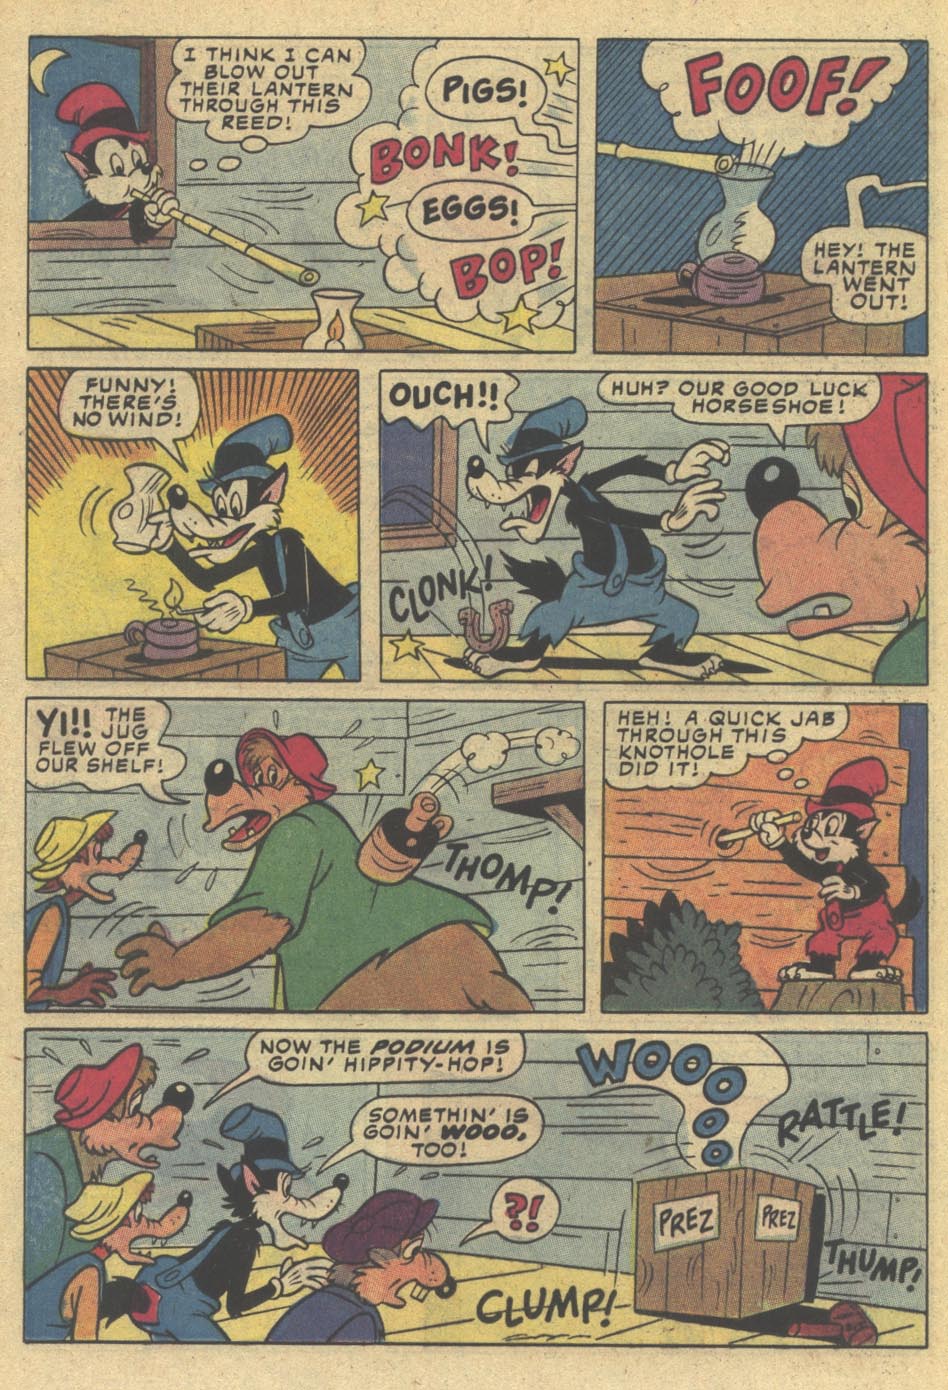 Walt Disney S Comics And Stories Issue 498 | Read Walt Disney S Comics And  Stories Issue 498 comic online in high quality. Read Full Comic online for  free - Read comics